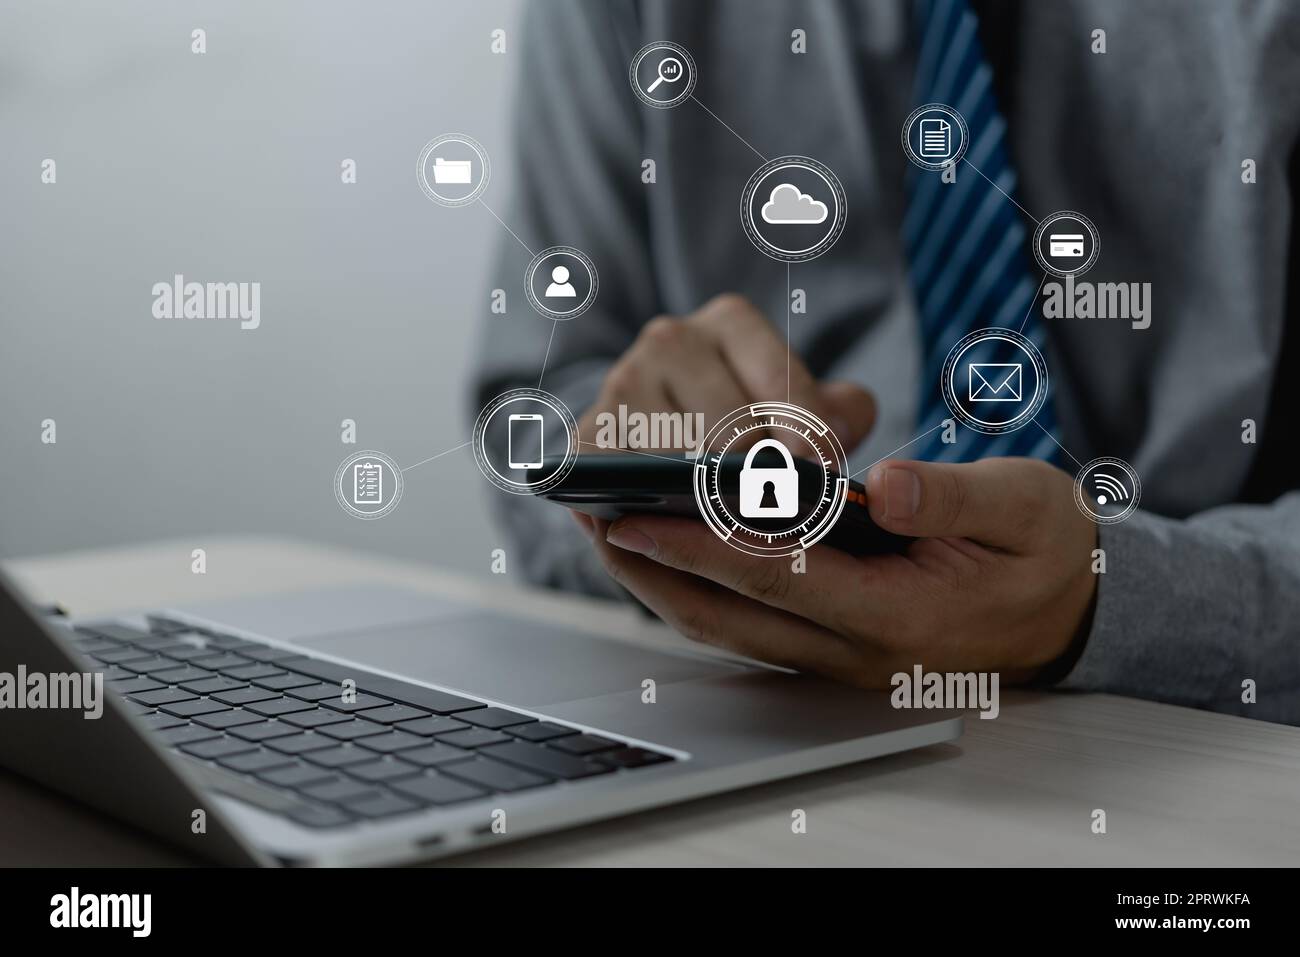 Businessman working with smartphone in hands. Cybersecurity hologram with glowing lock icons on the virtual screen.Business technology internet and networking concept Stock Photo